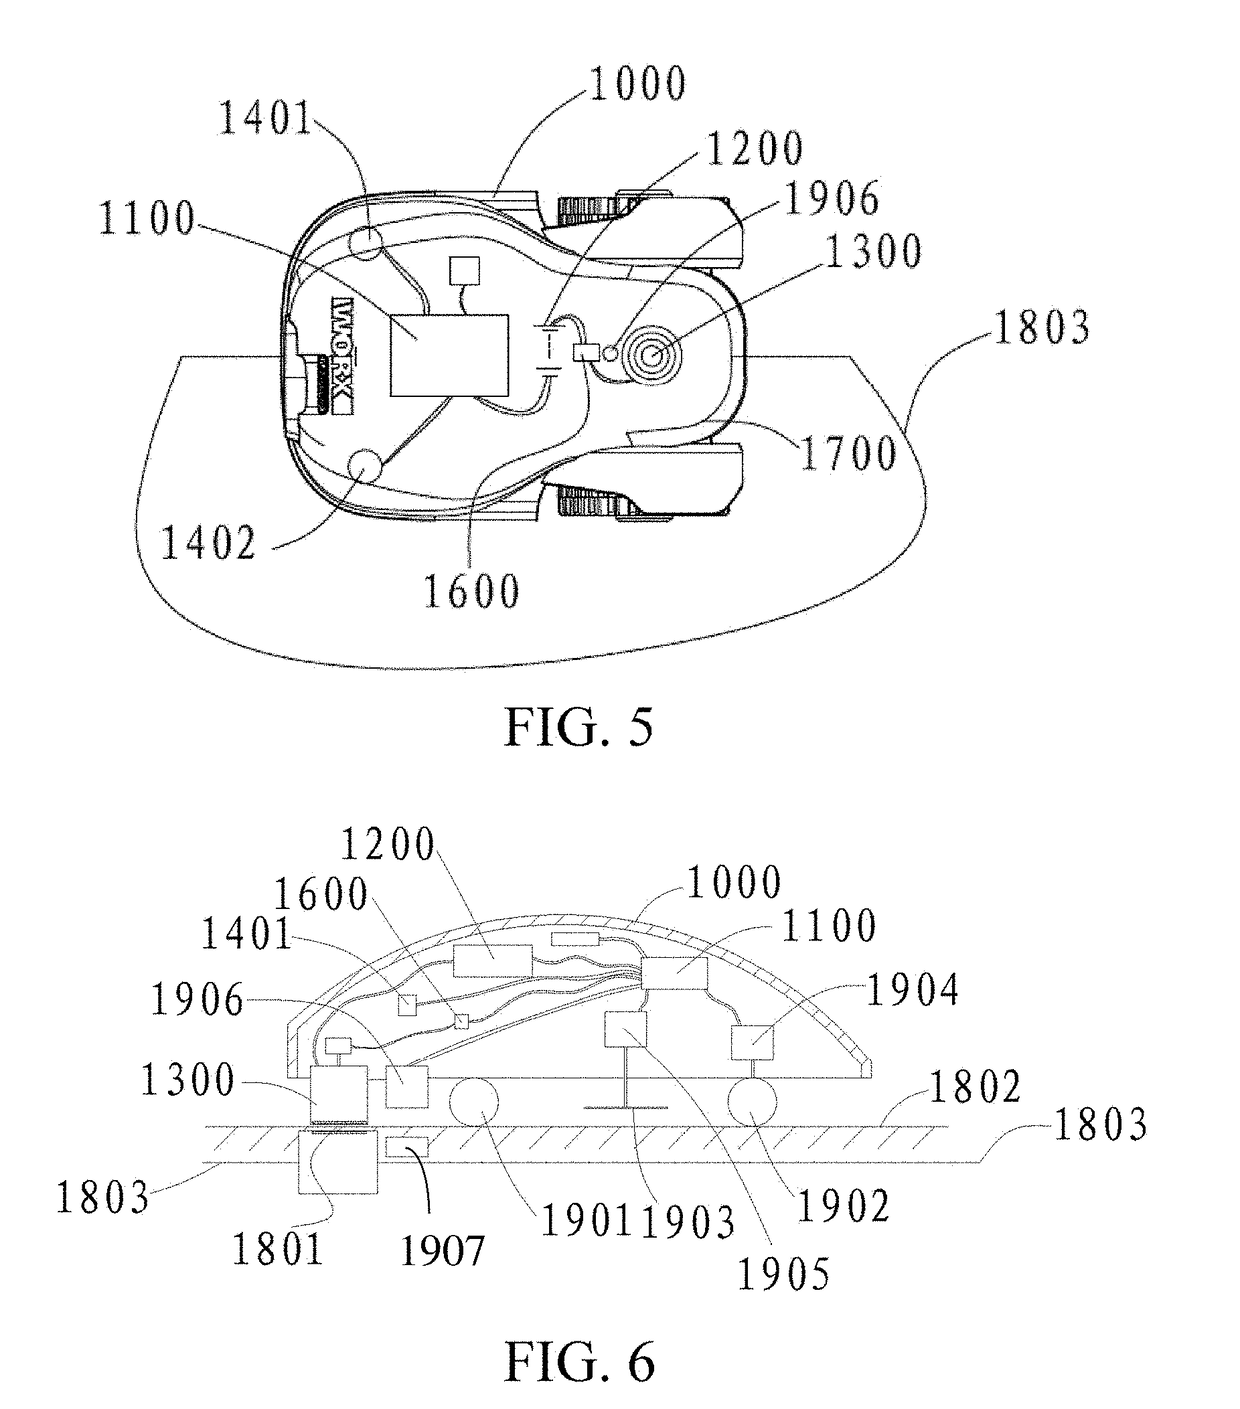 Autonomous Mobile Device and Wireless Charging System Thereof